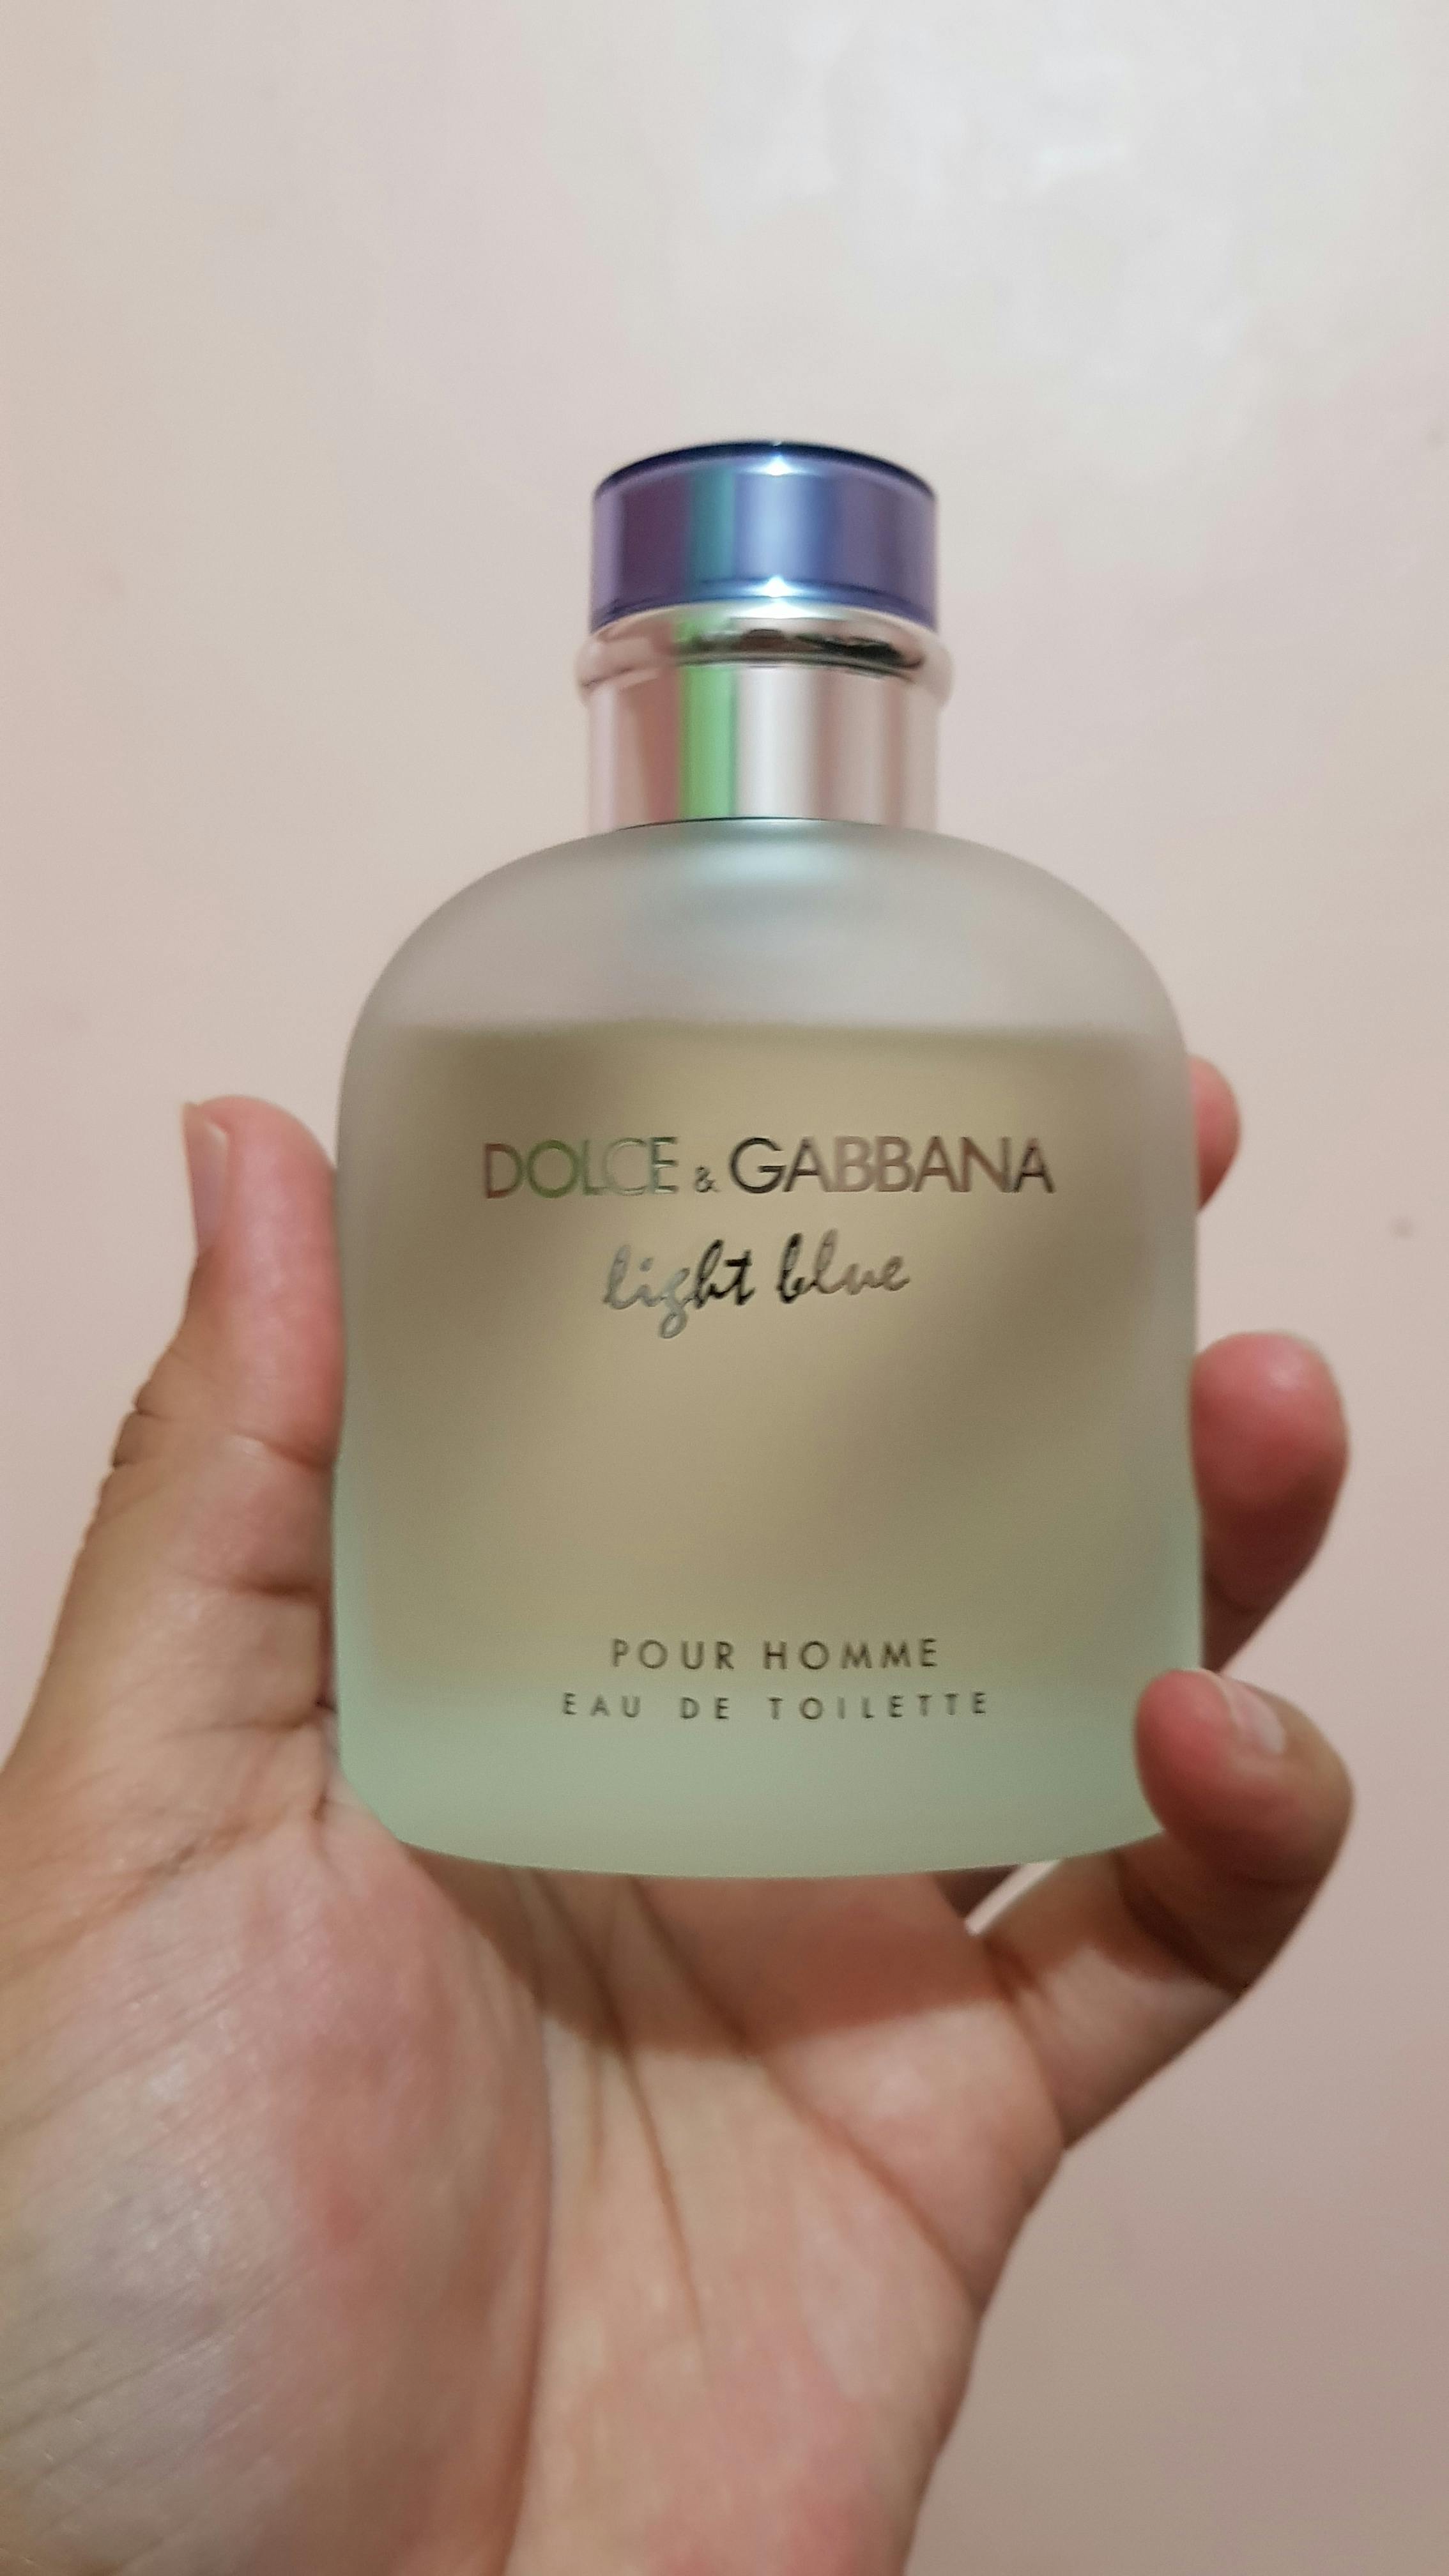 & Gabbana Light Men 125ml | Branded and Authentic Perfumes for Men and